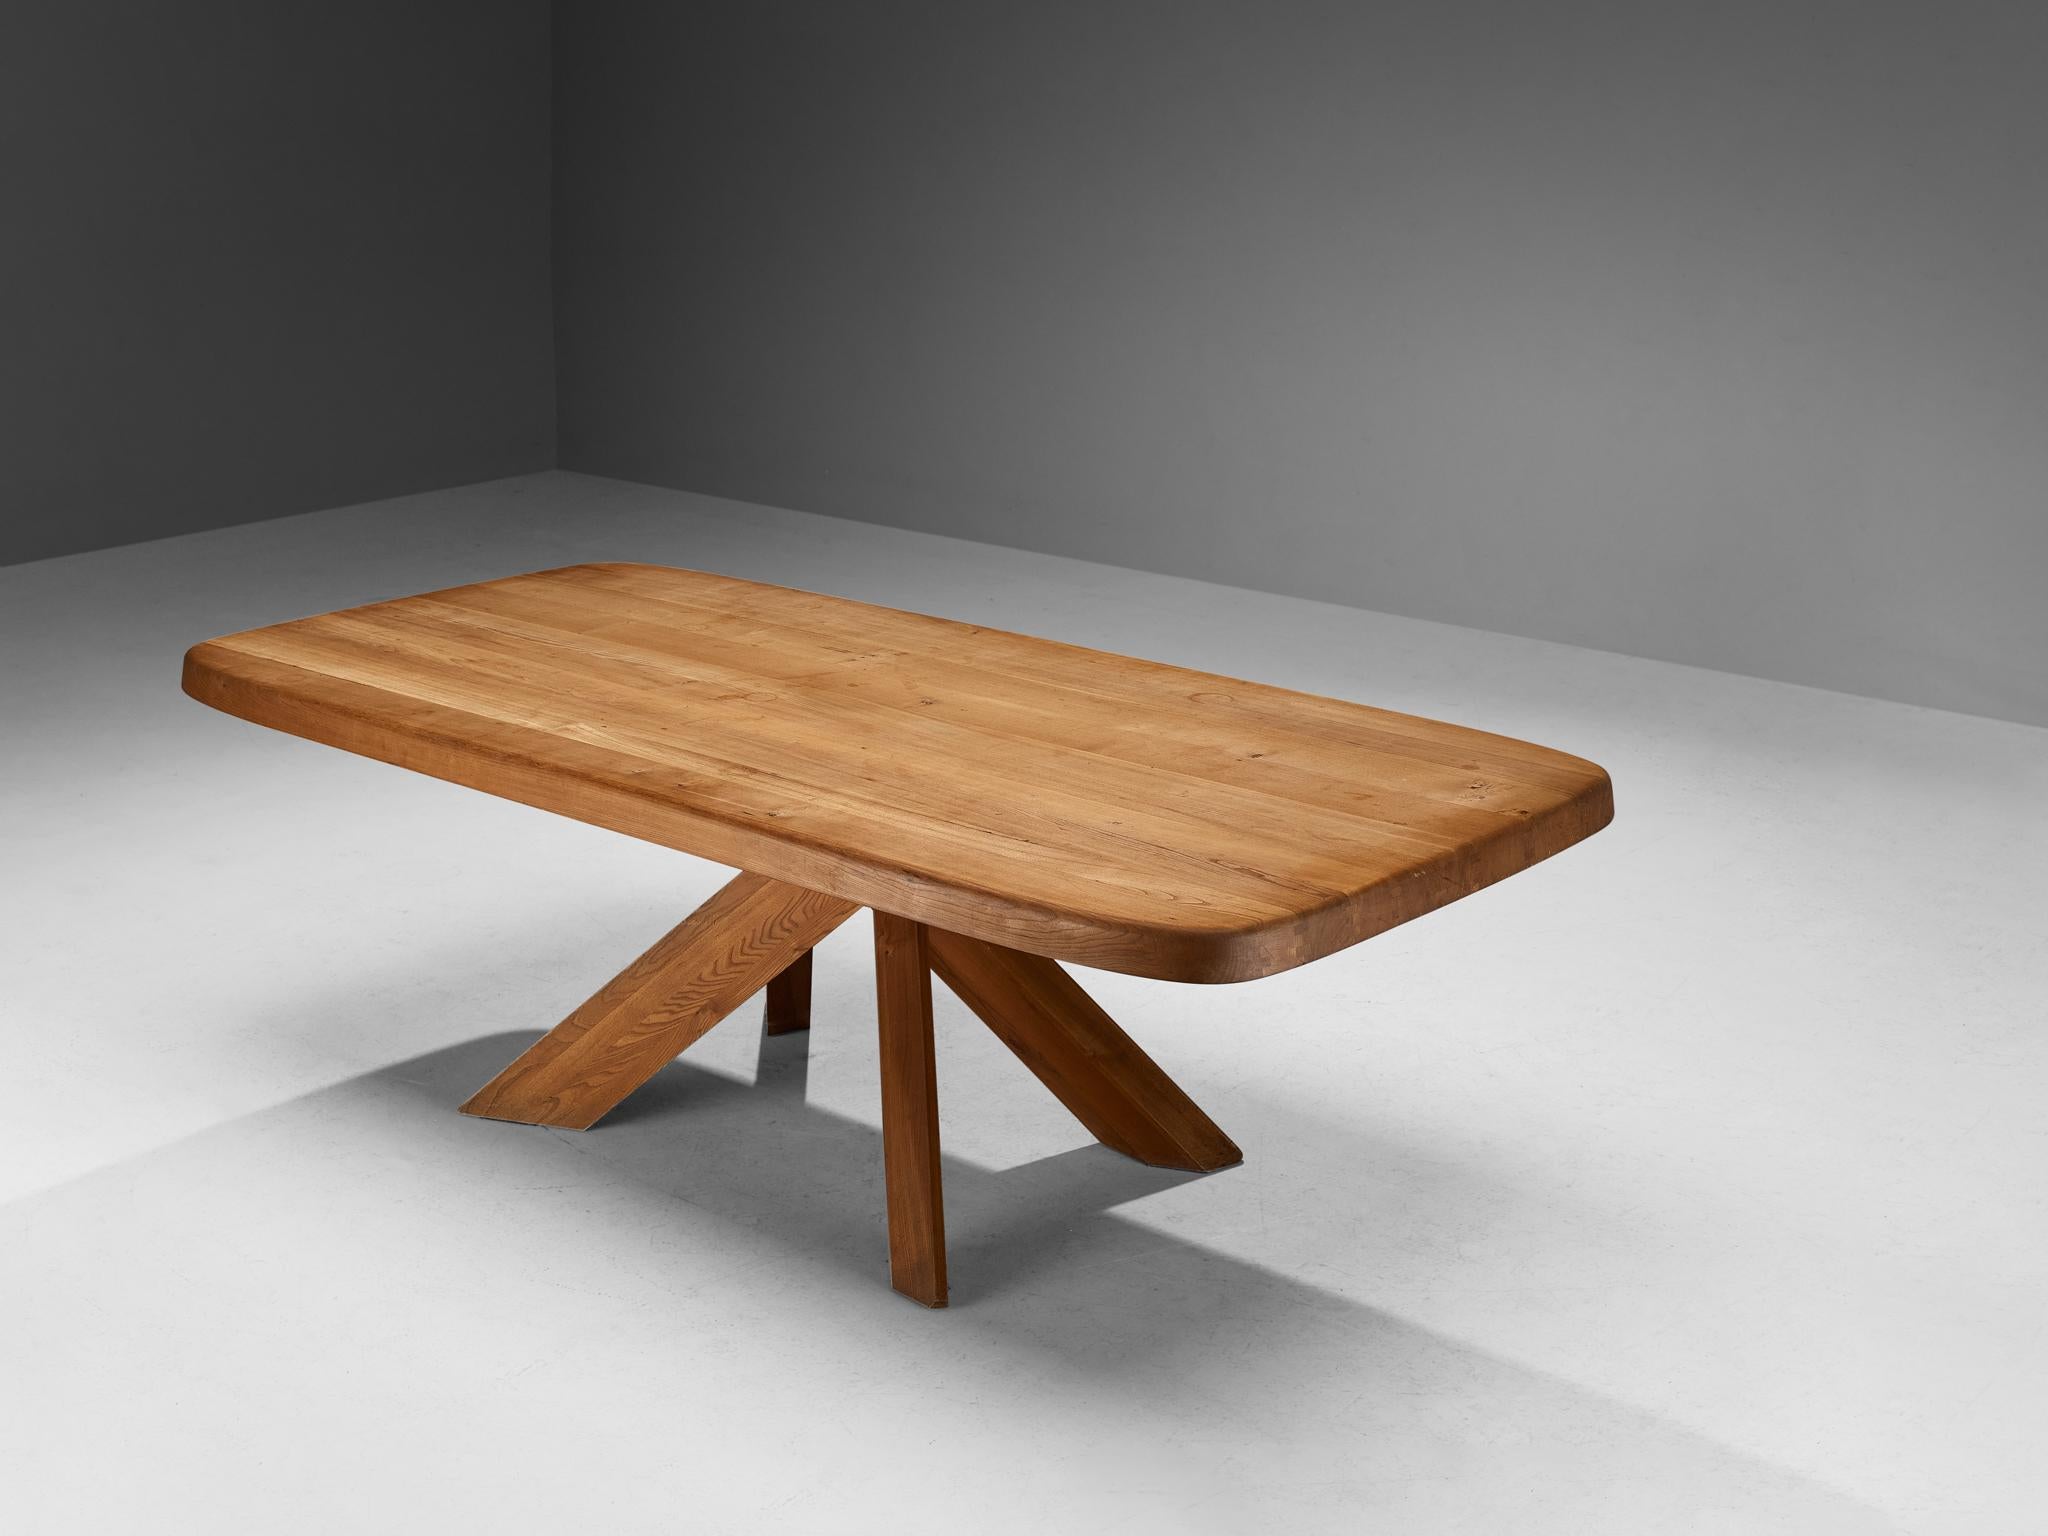 Pierre Chapo, dining table model 'Aban' T35D, solid elm, France, circa 1972 

This design is an early edition created by Pierre Chapo. The basic design and construction, as well as the use of solid elmwood characterizes the work of the designer The